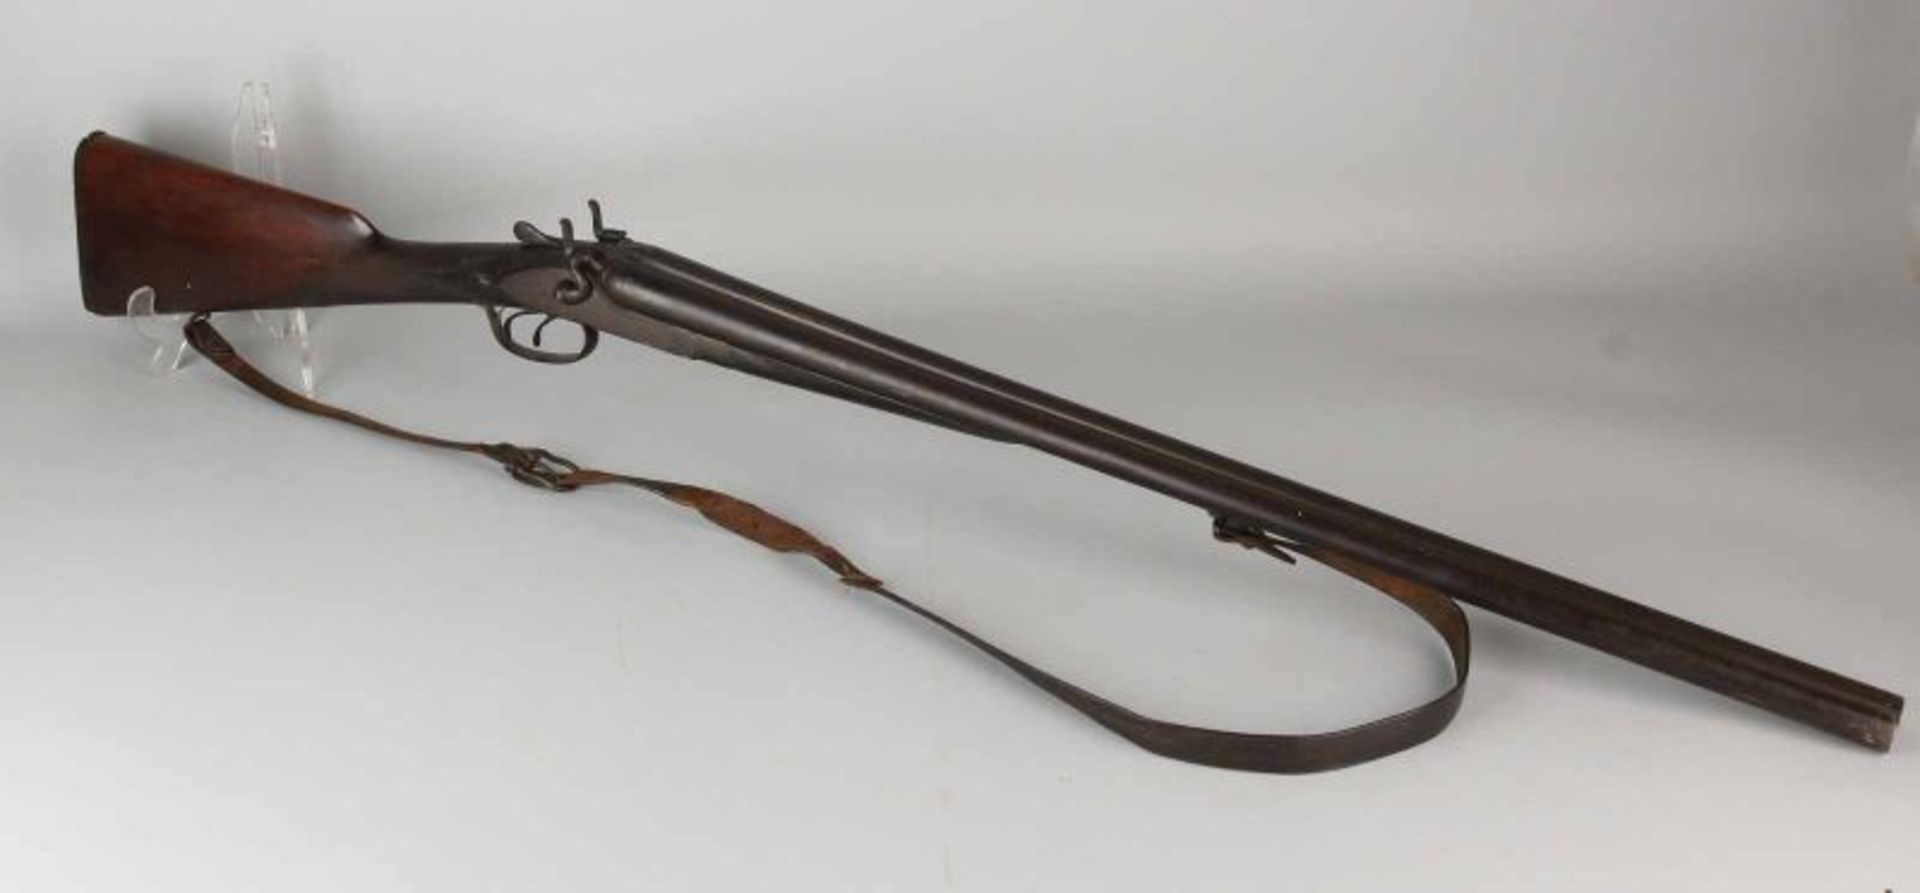 Antique double-barreled shotgun. Signed Eprouyl Poudre pyroxylee. Dimensions: L 111 cm. In good